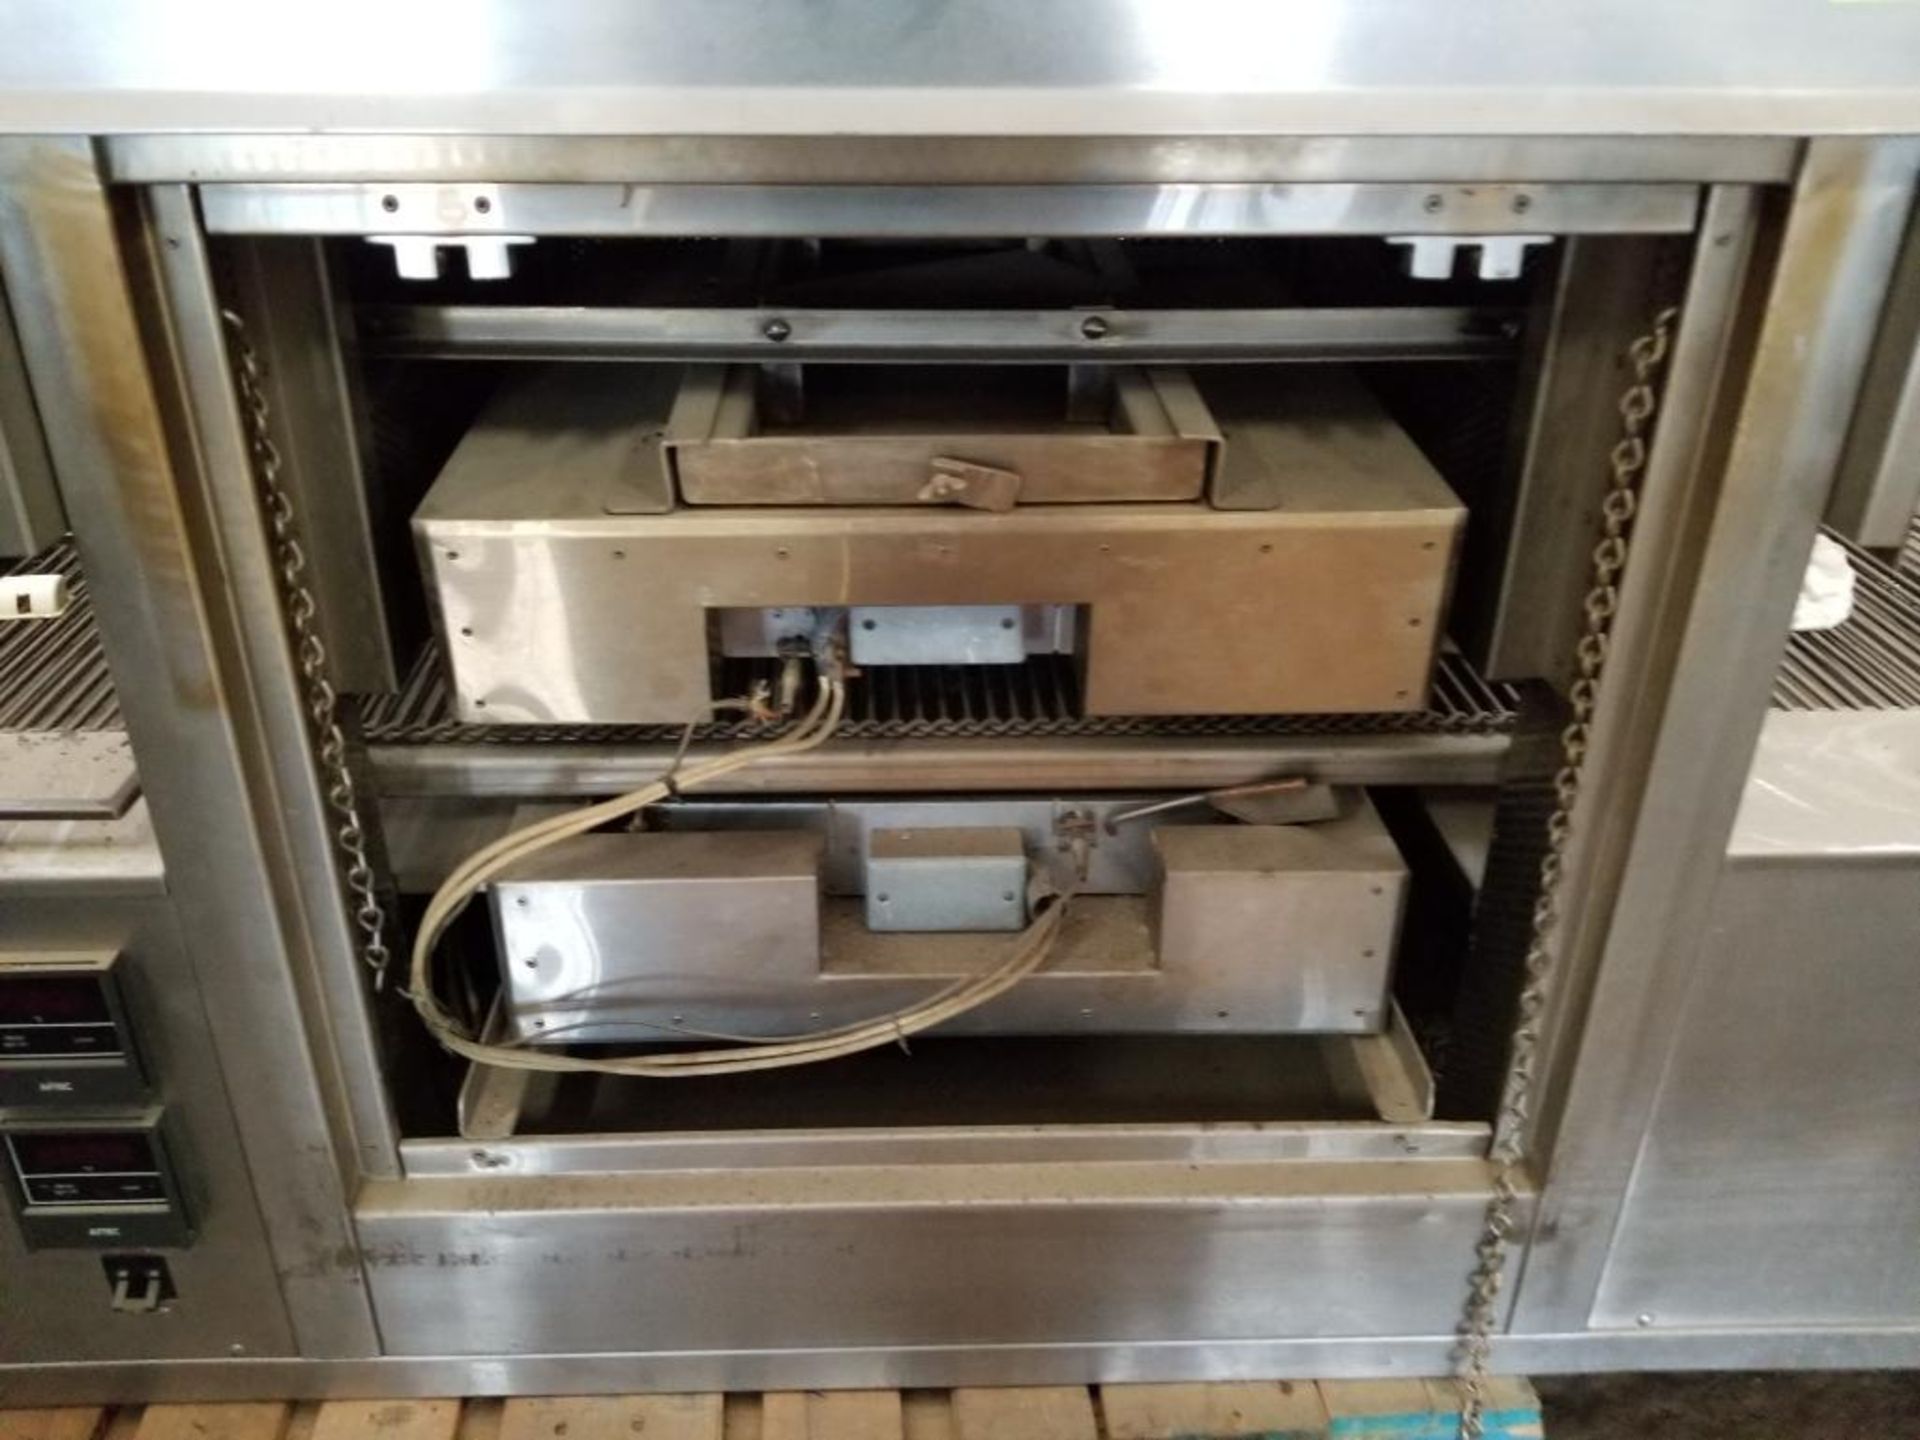 Thermobake pass-through oven. 76x32x39. LxWxH. 18" mouth. - Image 2 of 7